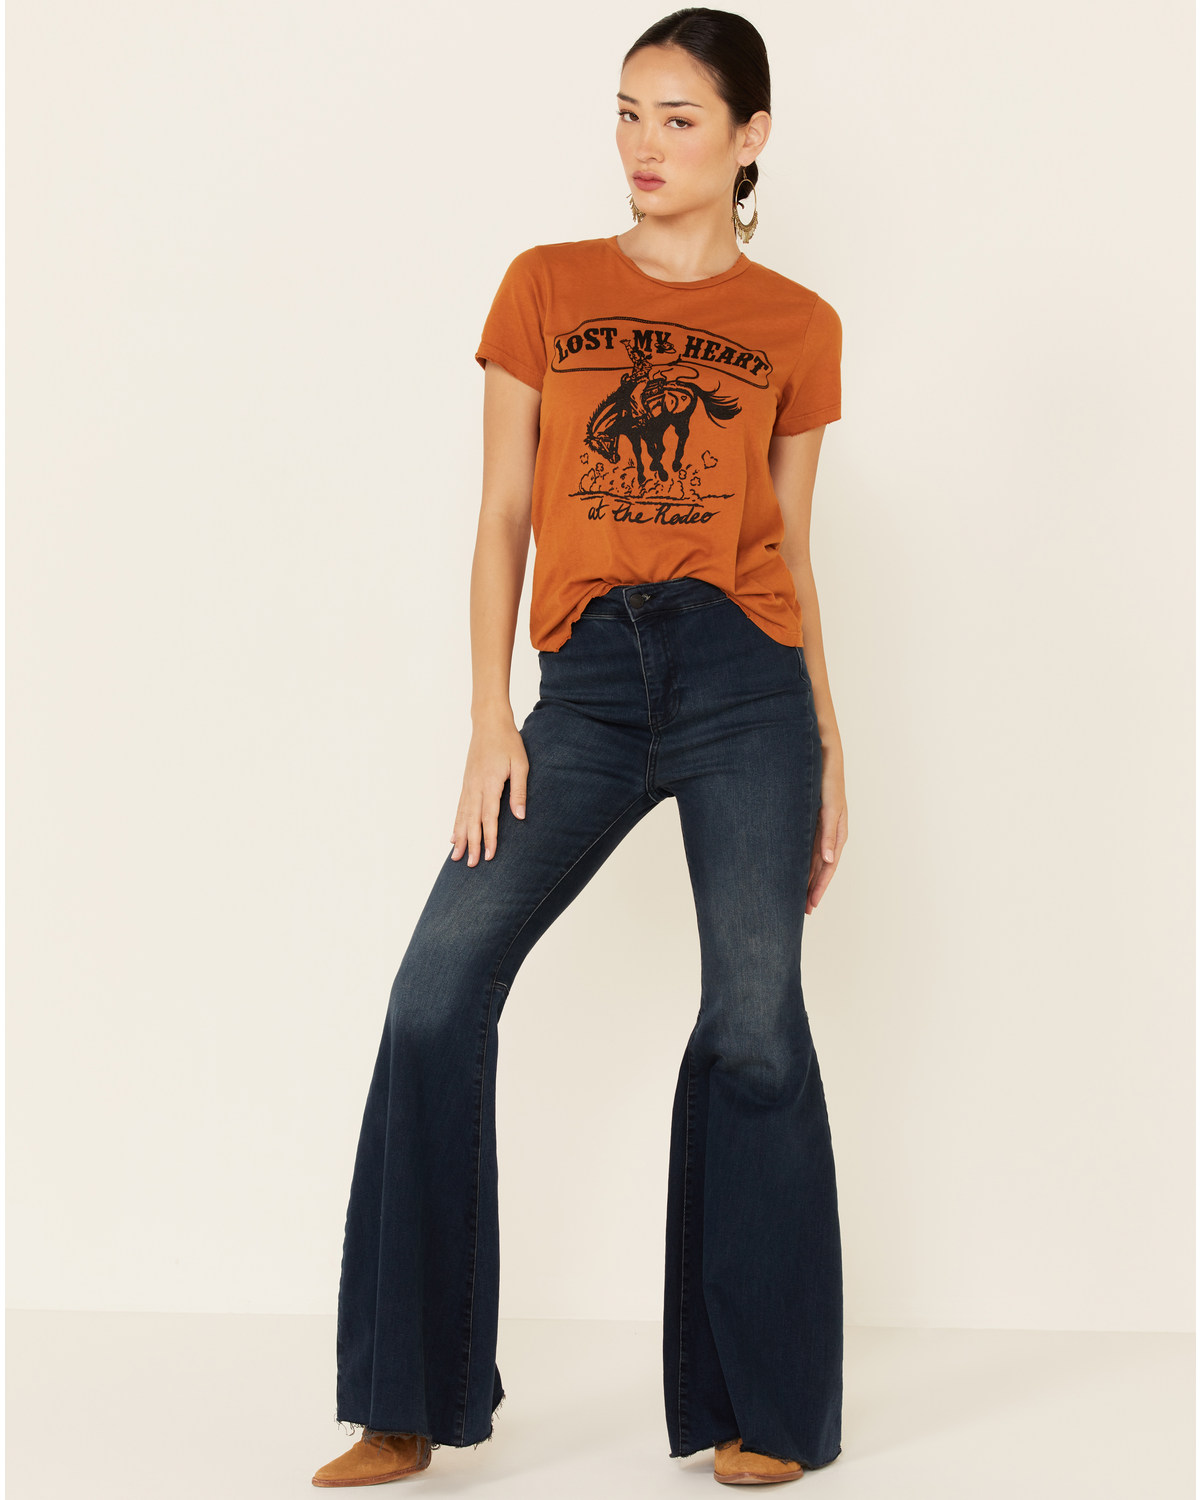 Bandit Women's Cognac Lost My Heart At The Rodeo Graphic Tee | Boot Barn